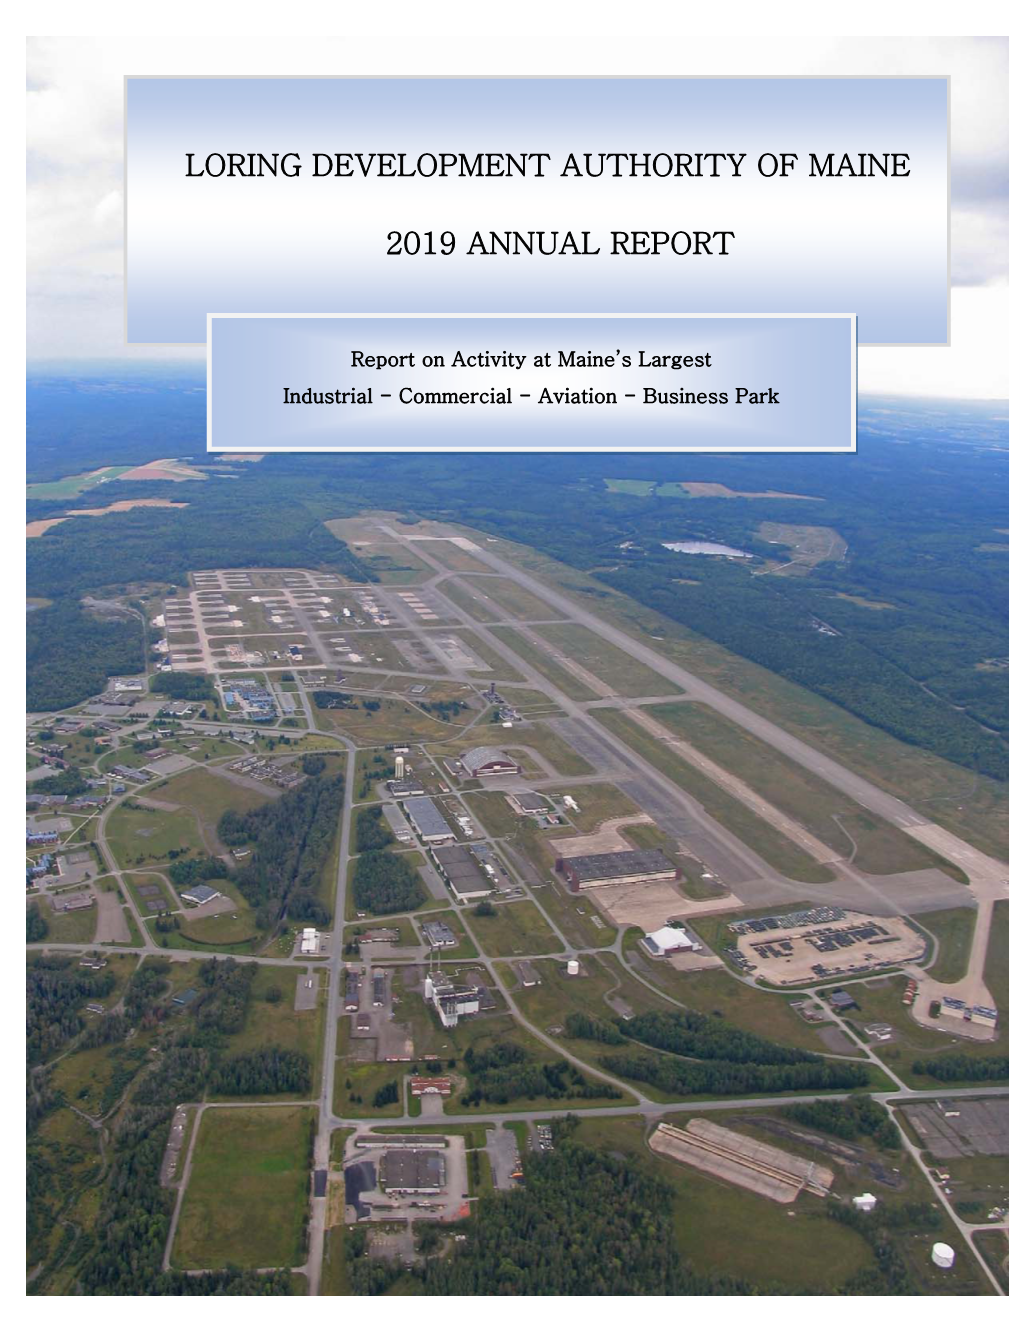 Loring Development Authority of Maine 2019 Annual Report